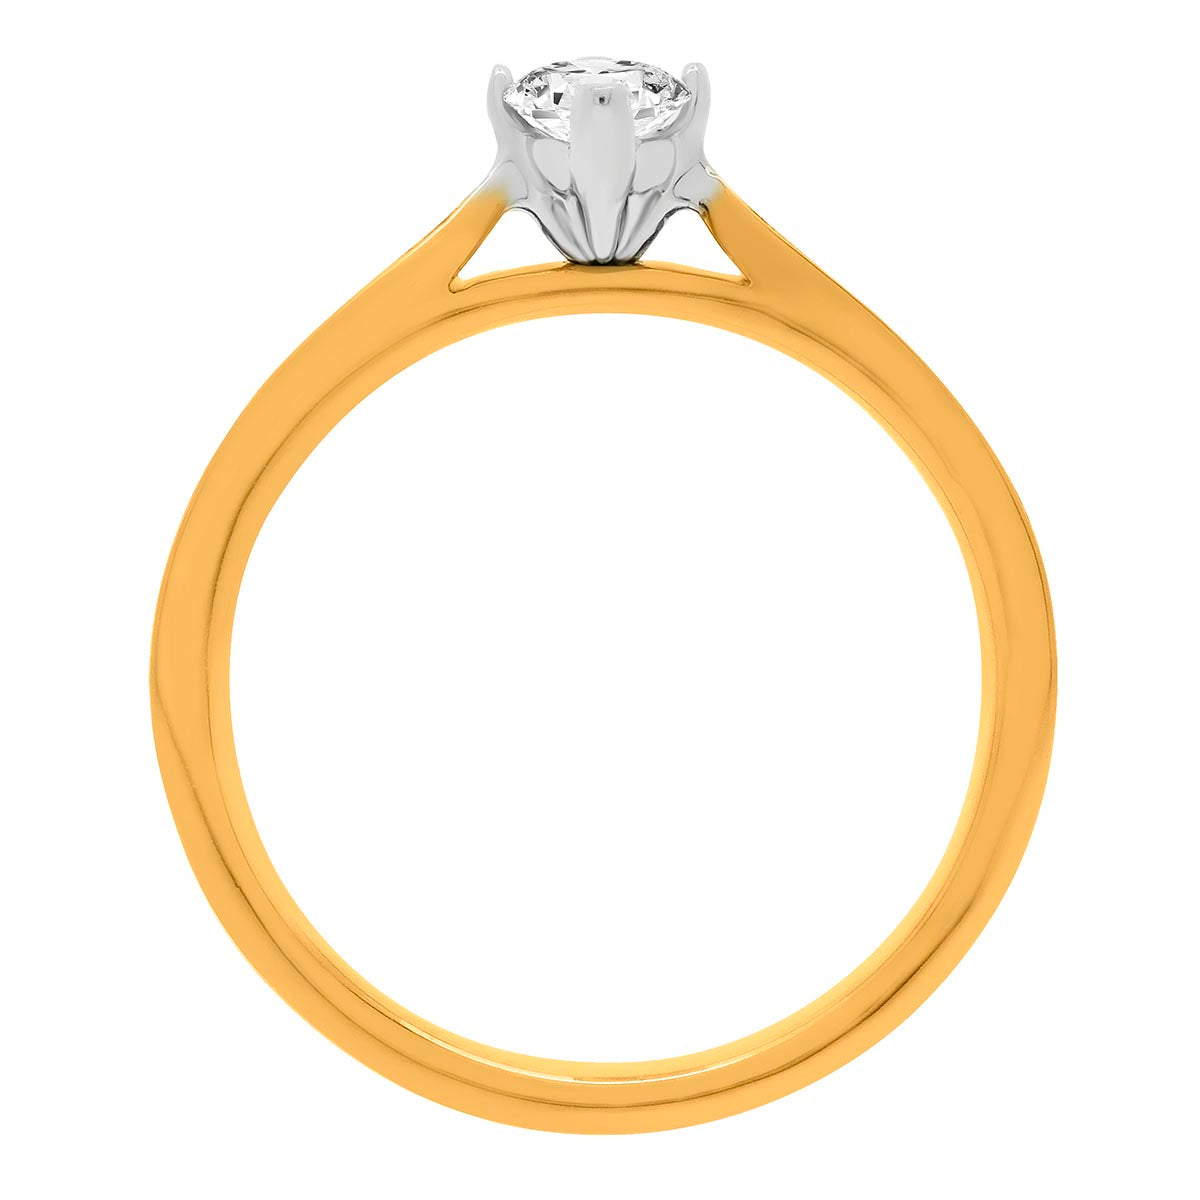 Marquise Engagement Ring made from 18 karat yellow gold standing vertical